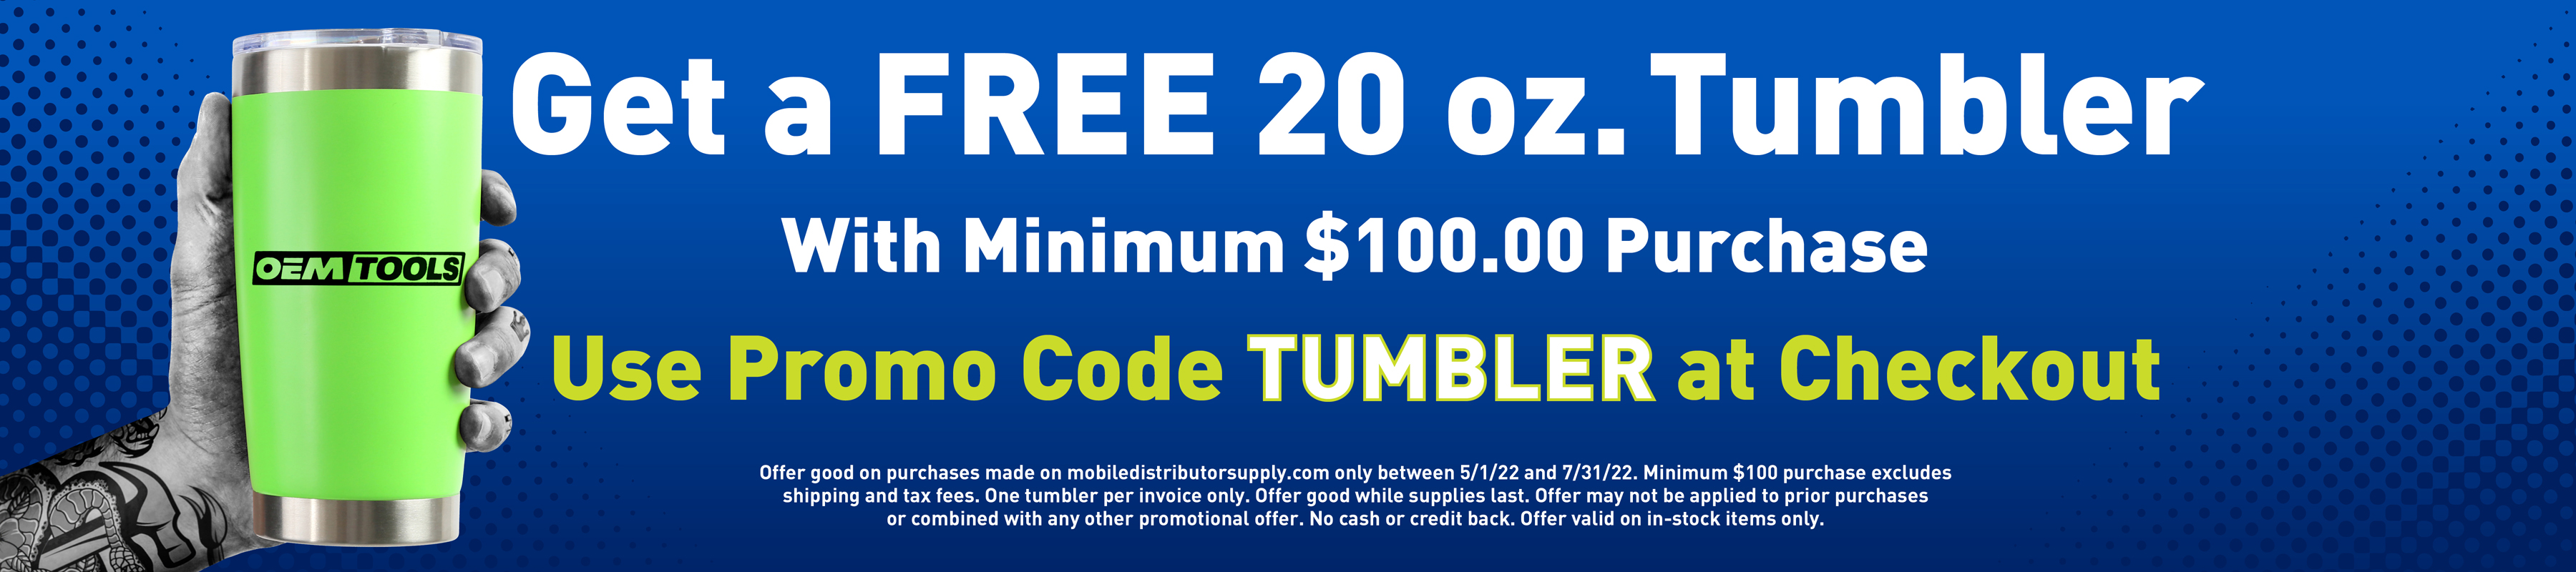 Free 20 OZ. Tumbler with $100 purchase